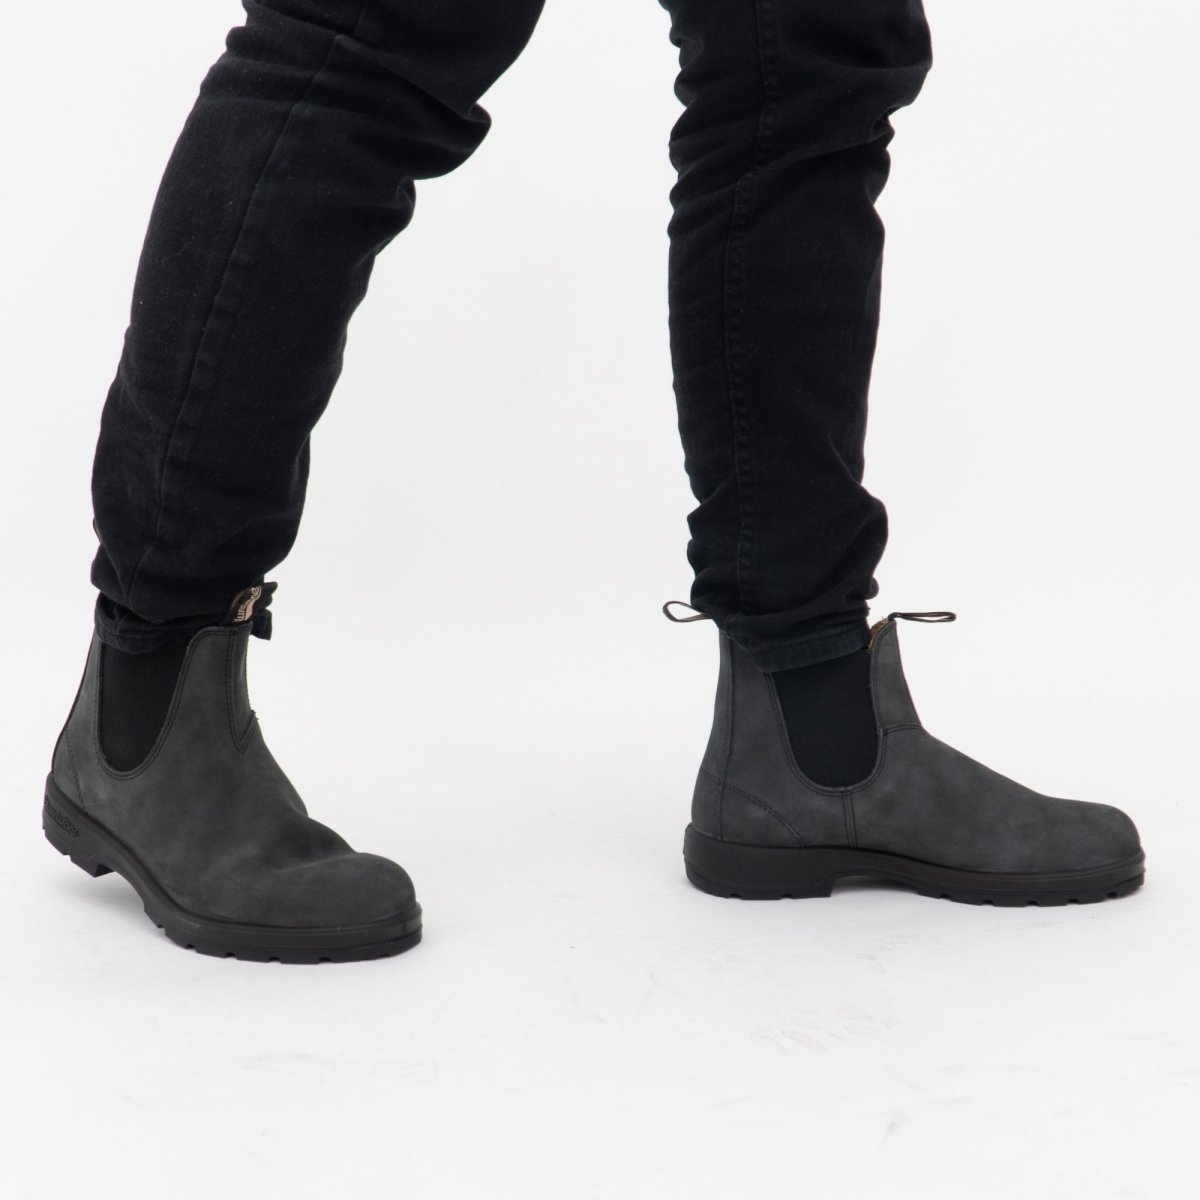 Blundstone 587 Unisex Leather Chelsea Boots Rustic Black 587 - 3 | STB.co.uk